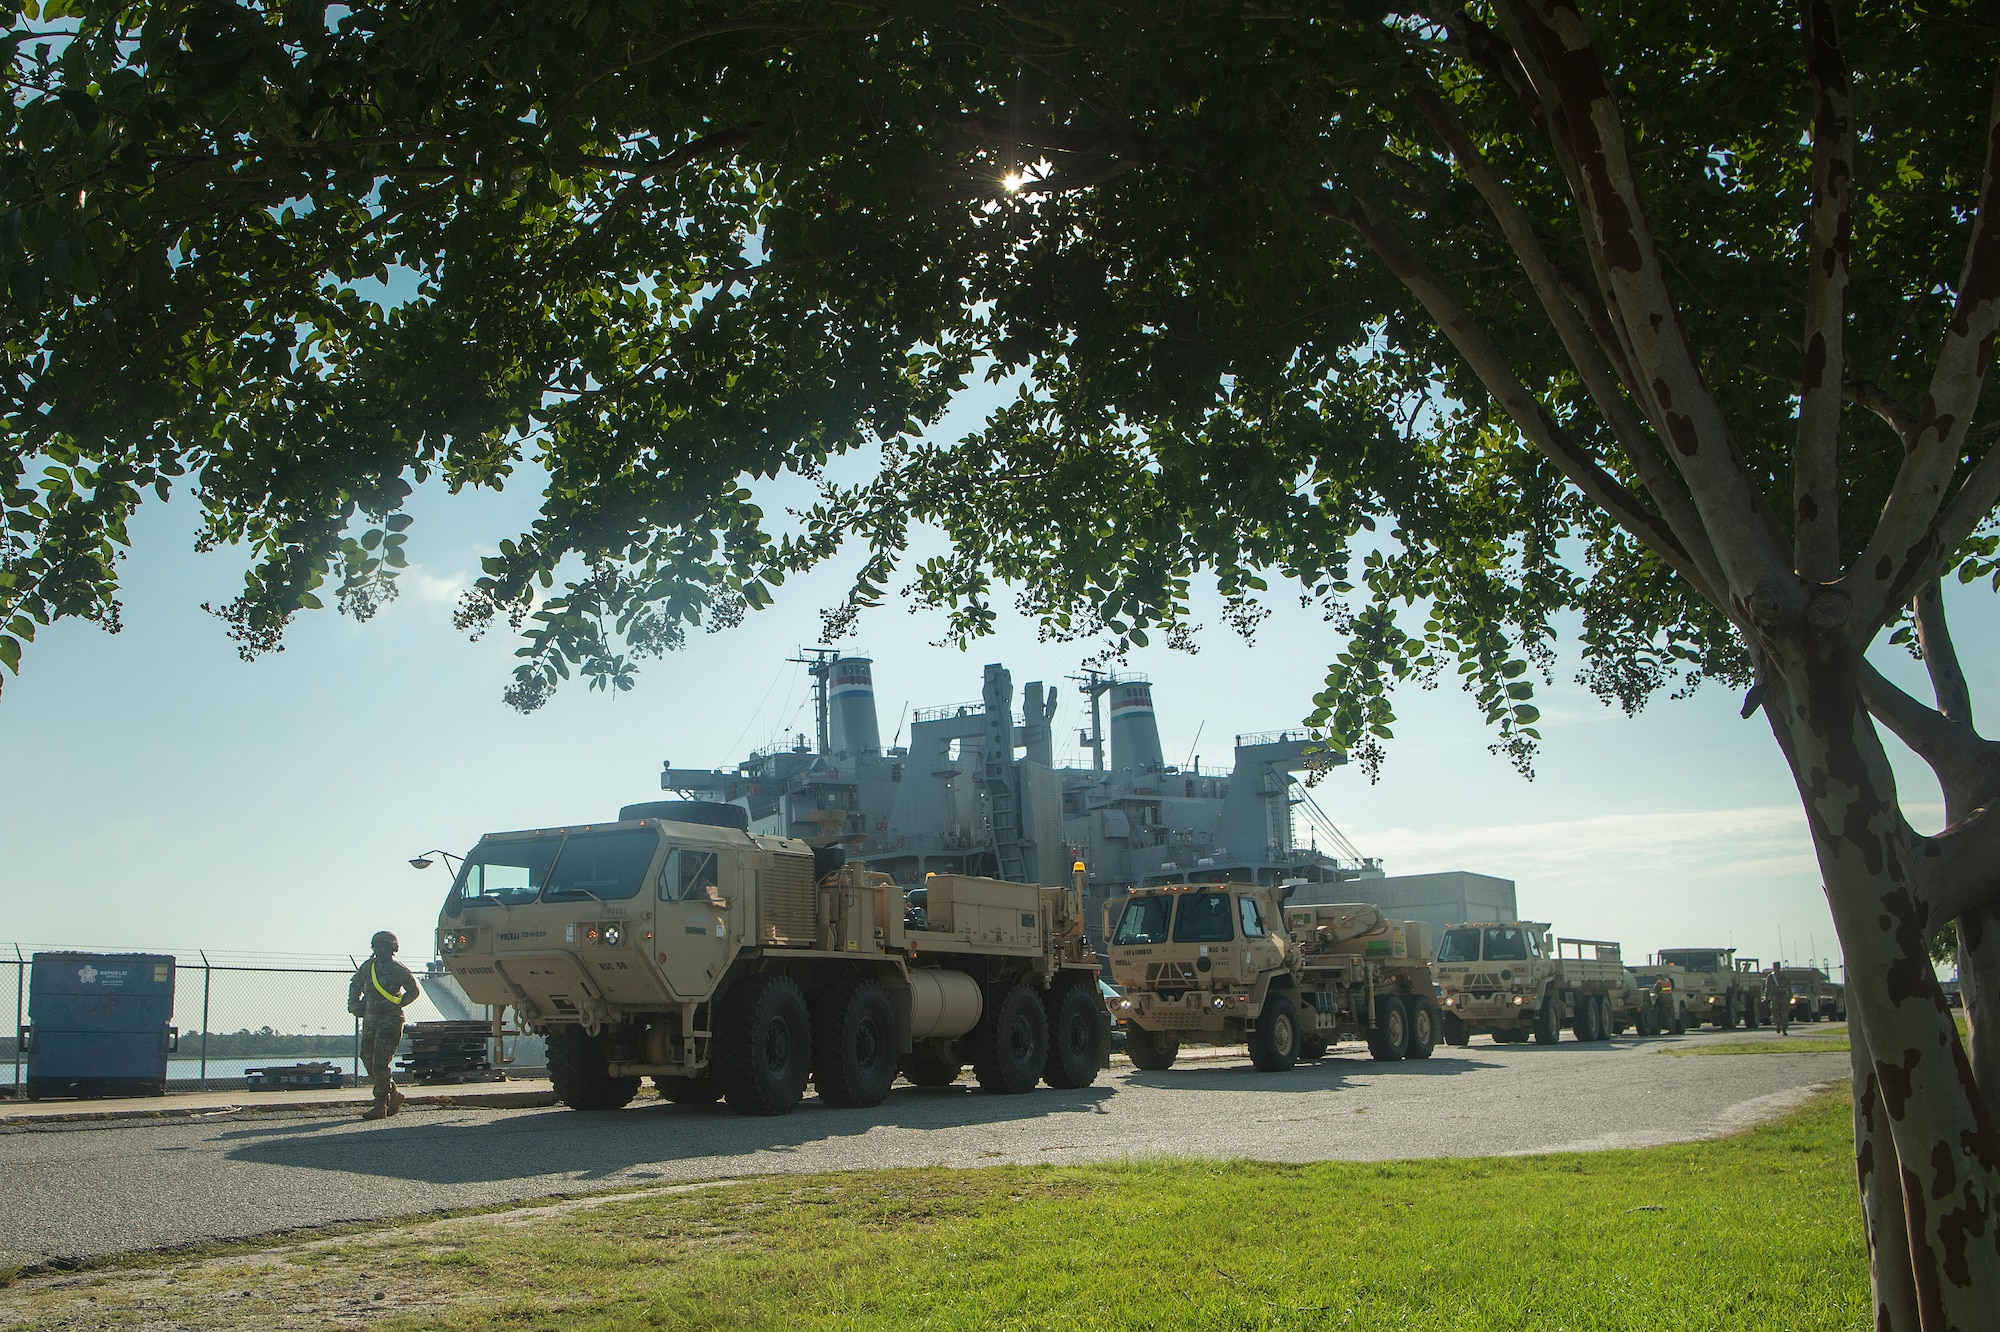 U.S. Army vehicles are staged prior to being moved onto the Logistics Naval Vessel Cape Decision during Exercise Dragon Lifeline Aug. 7, 2019, at the Federal Law Enforcement Training Center in Charleston, S.C. The exercise provided military personnel with experience needed to support rapid deployment operations across air, land, rail and sea. JB Charleston helps to provide rapid global deployment of personnel and equipment to deployed locations across the globe. The annual exercise is just one of the critical readiness exercises the DOD conducts to maintain a lethal and ready force. (U.S. Air Force photo by Tech. Sgt. Christopher Hubenthal)